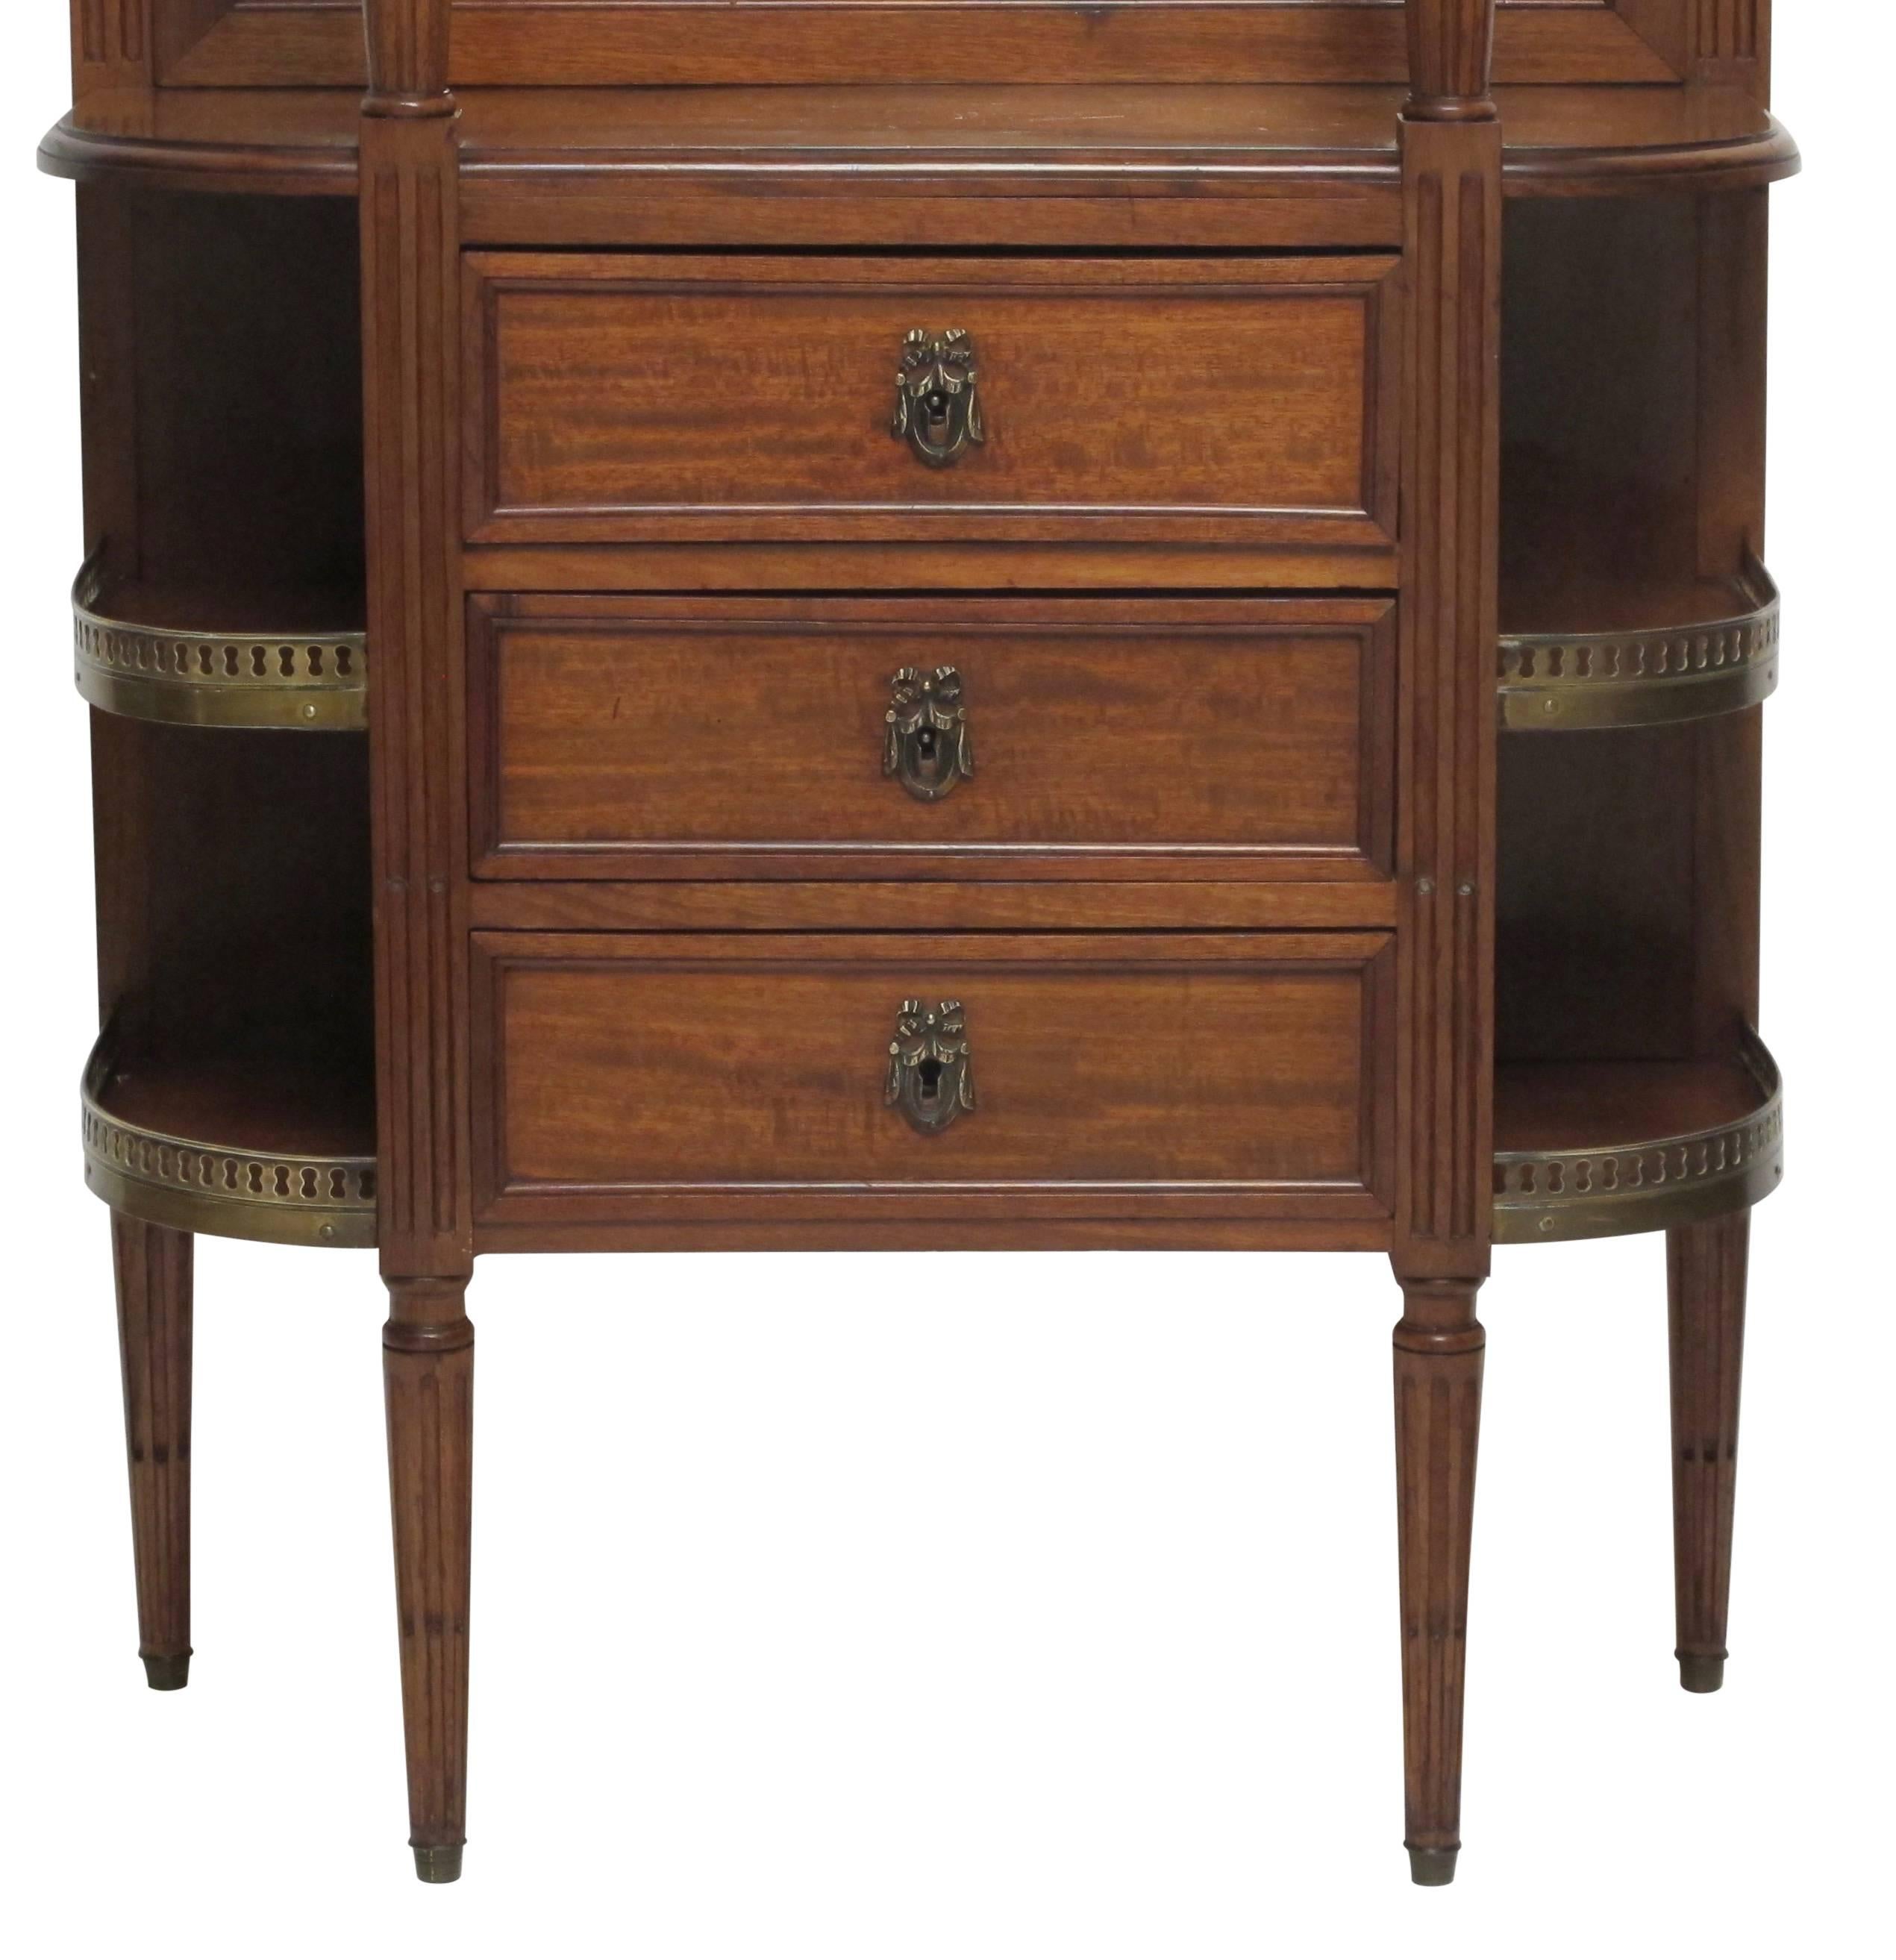 20th Century Mahogany Louis XVI Style What Not Stand with Marble Top, French, circa 1900